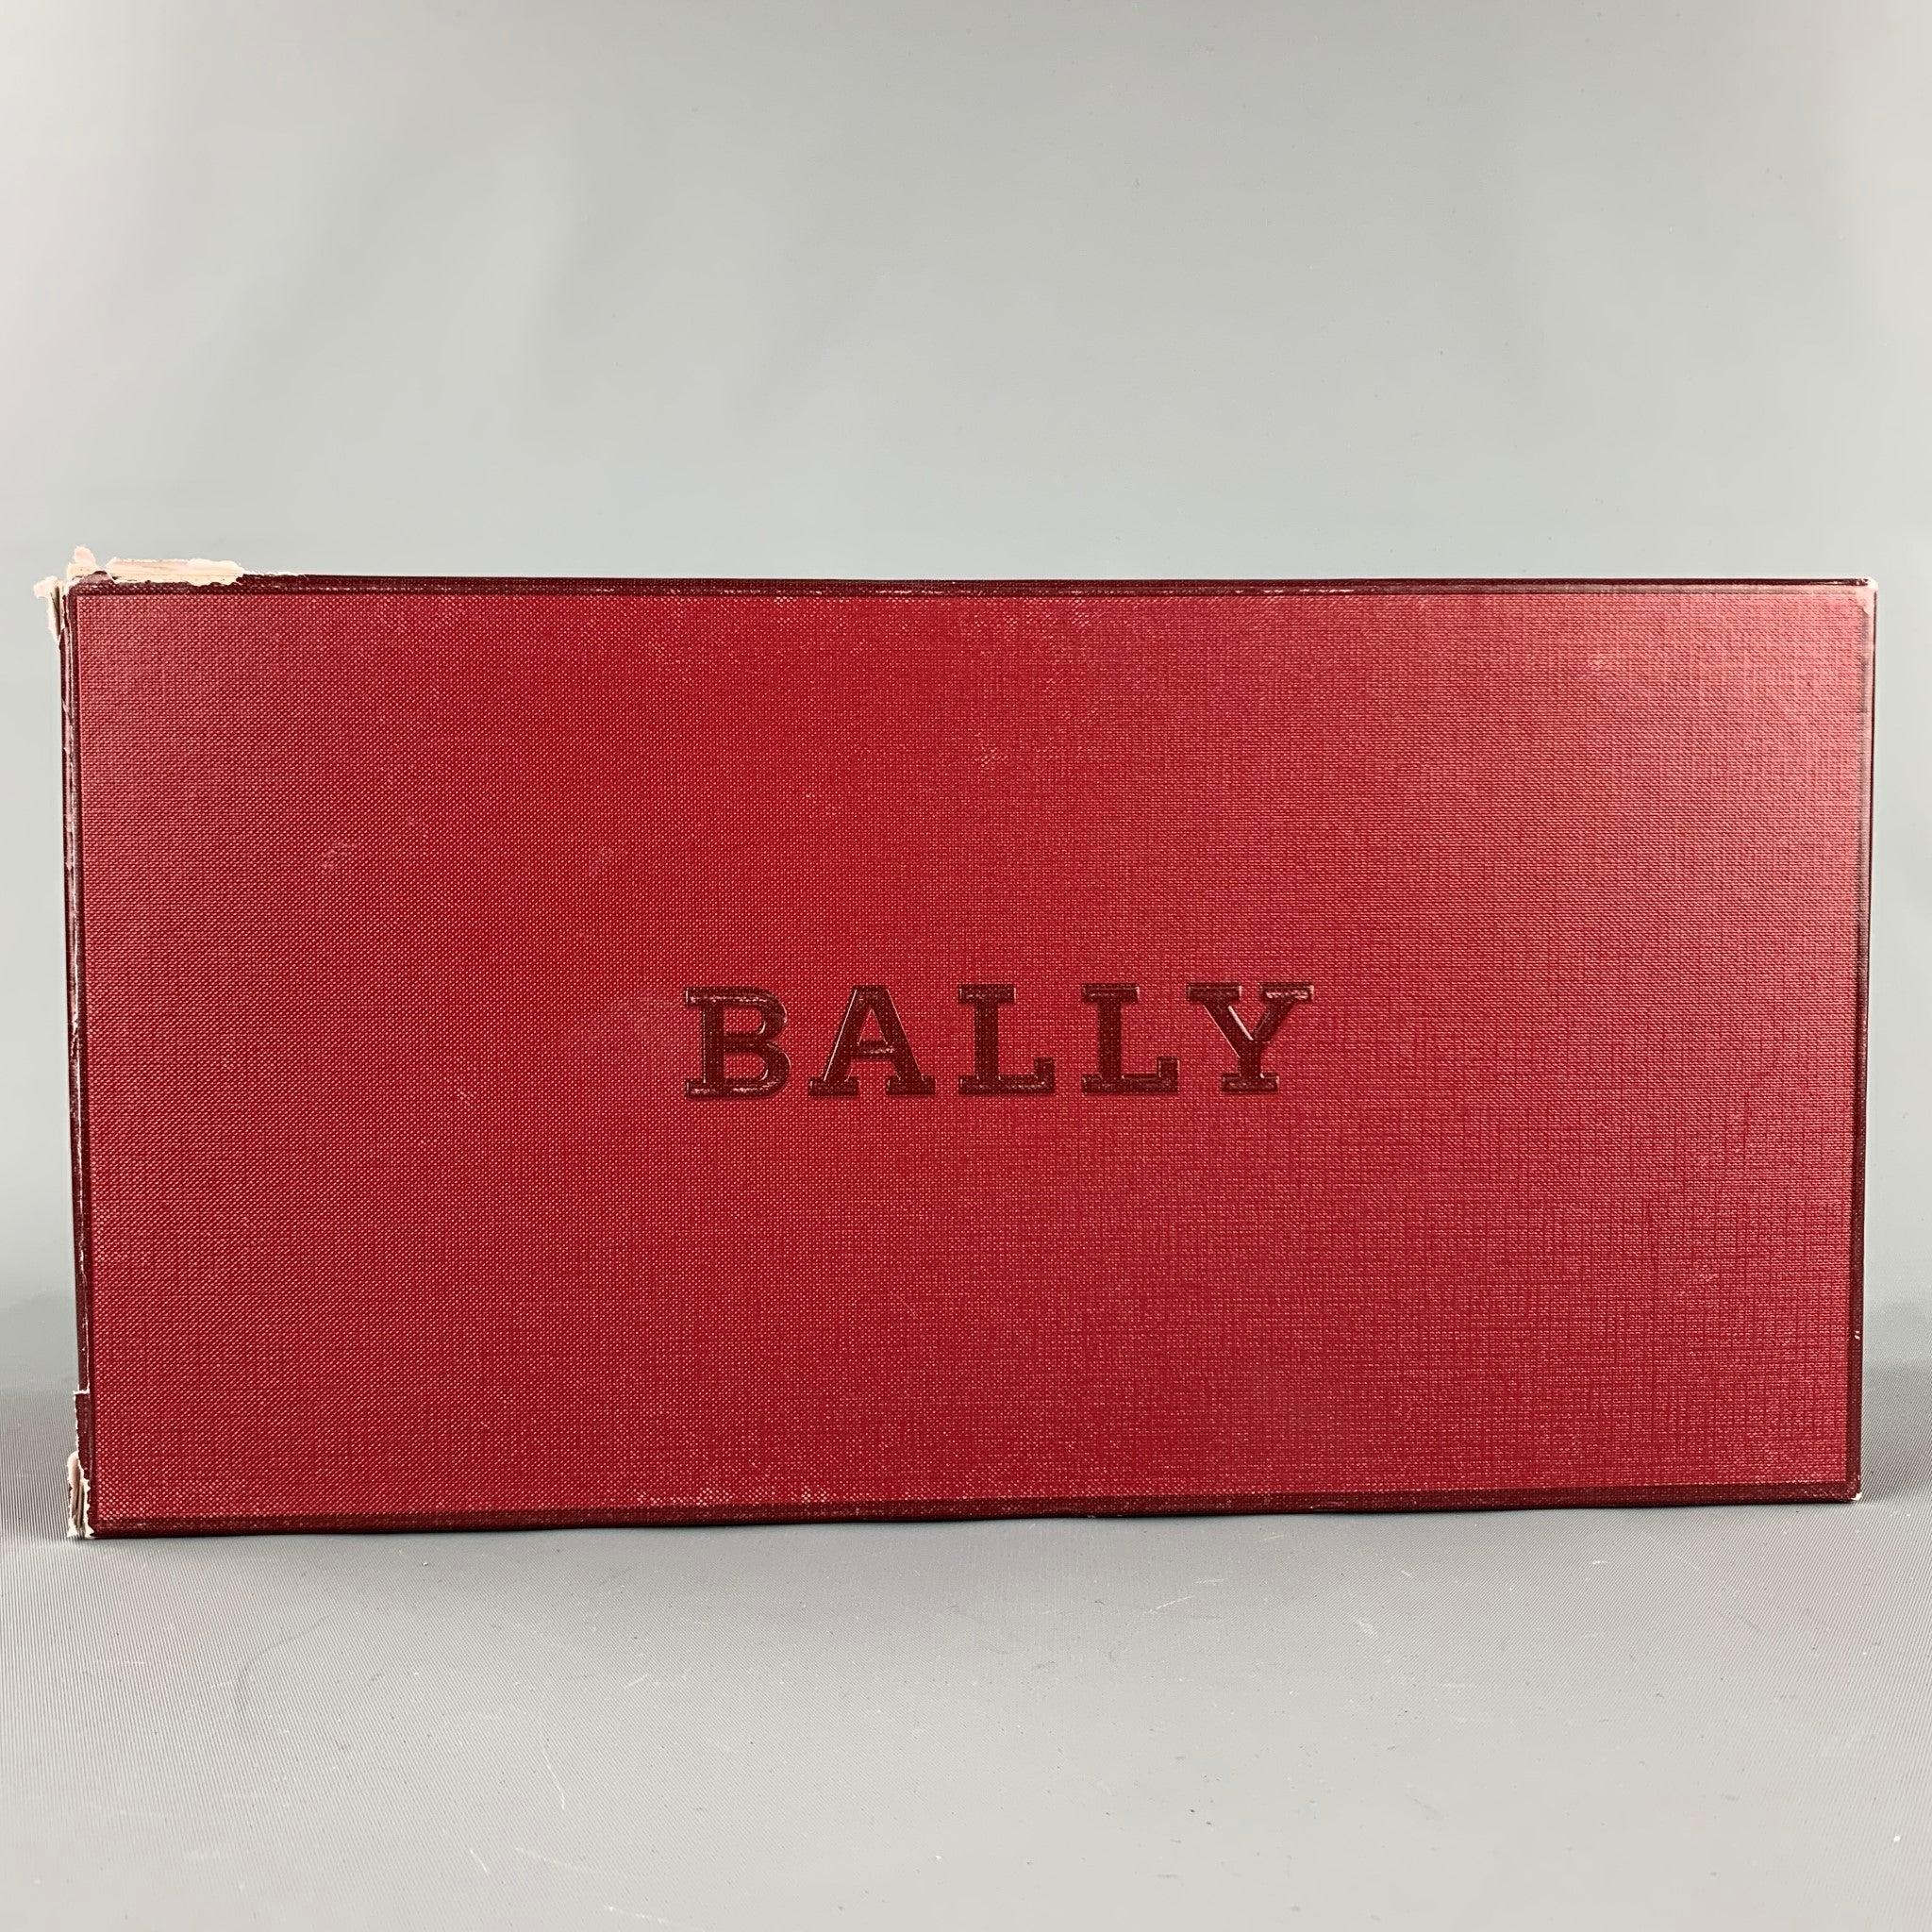 BALLY Garrett Size 8 Black Patent Leather Lace Up Shoes For Sale 5